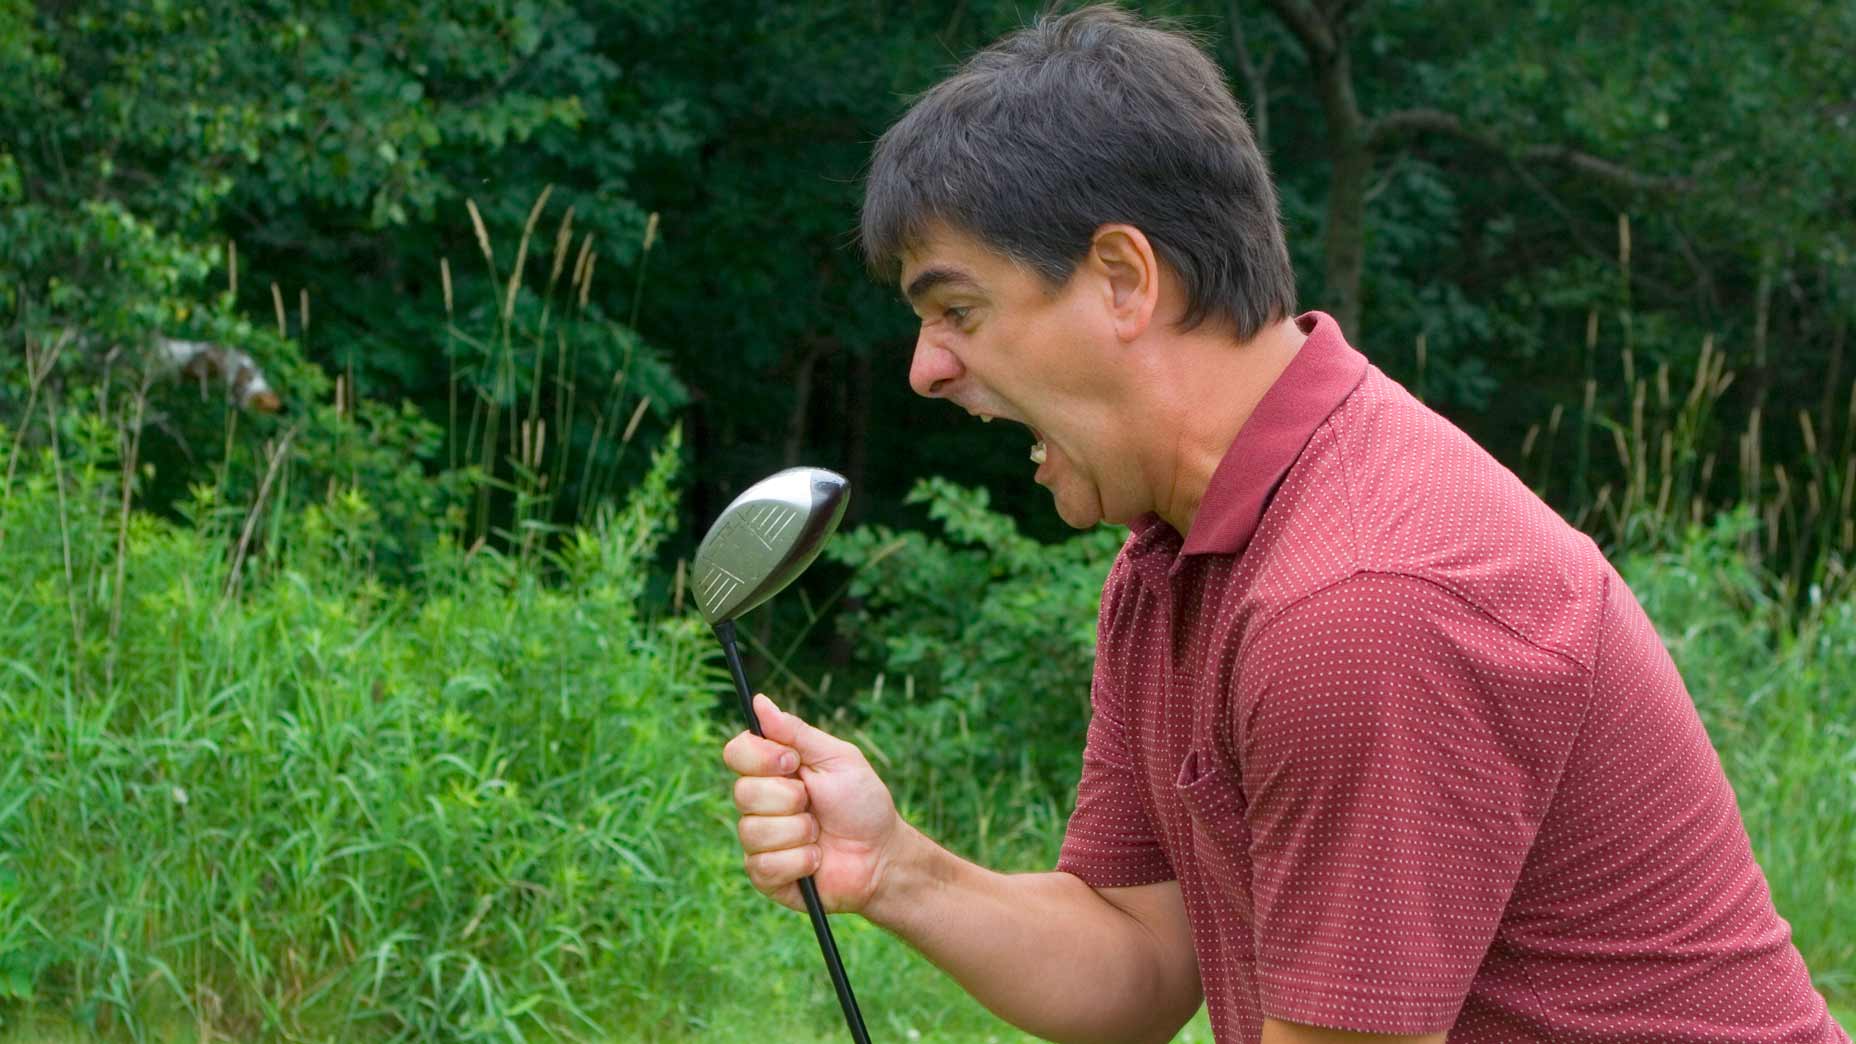 The 7 most common first-tee excuses, graded from lame to lamest